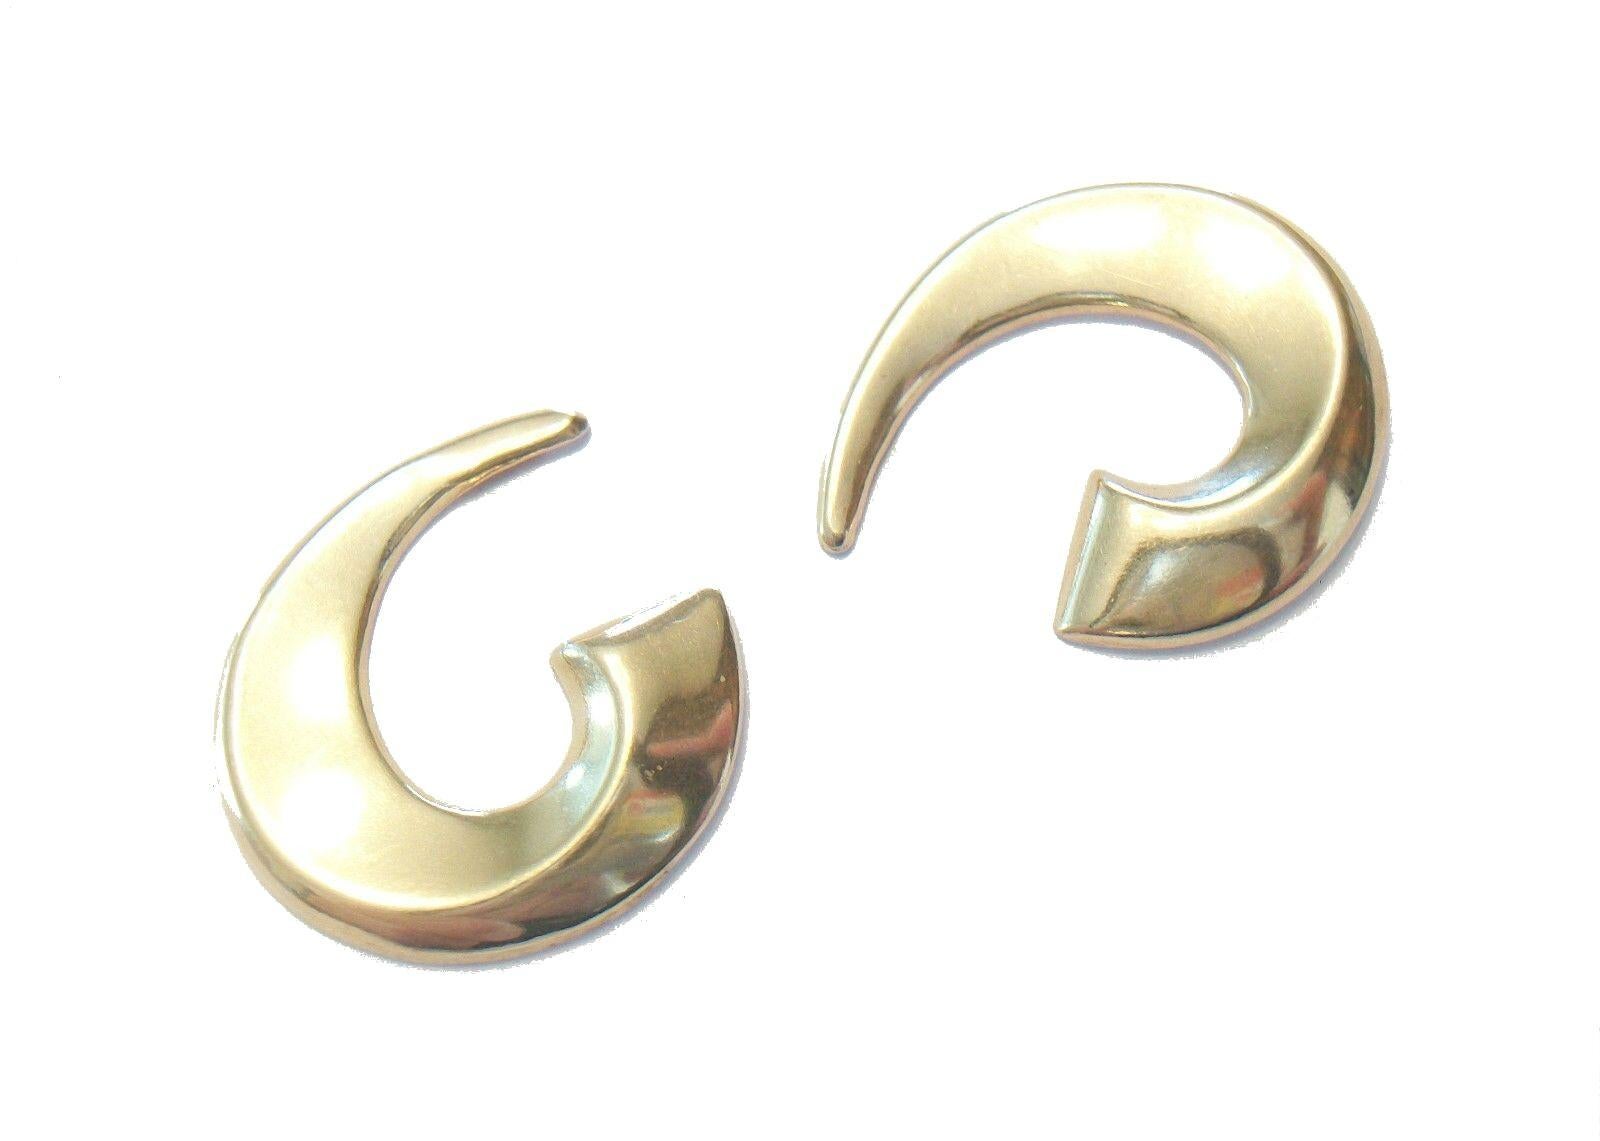 Vintage 14 K yellow gold earrings - three dimensional 'C' scroll shape - post backs for pierced ears with original butterfly backs - each signed B Y (including butterfly backs) - each stamped 14 K (including butterfly backs) - United States (likely)